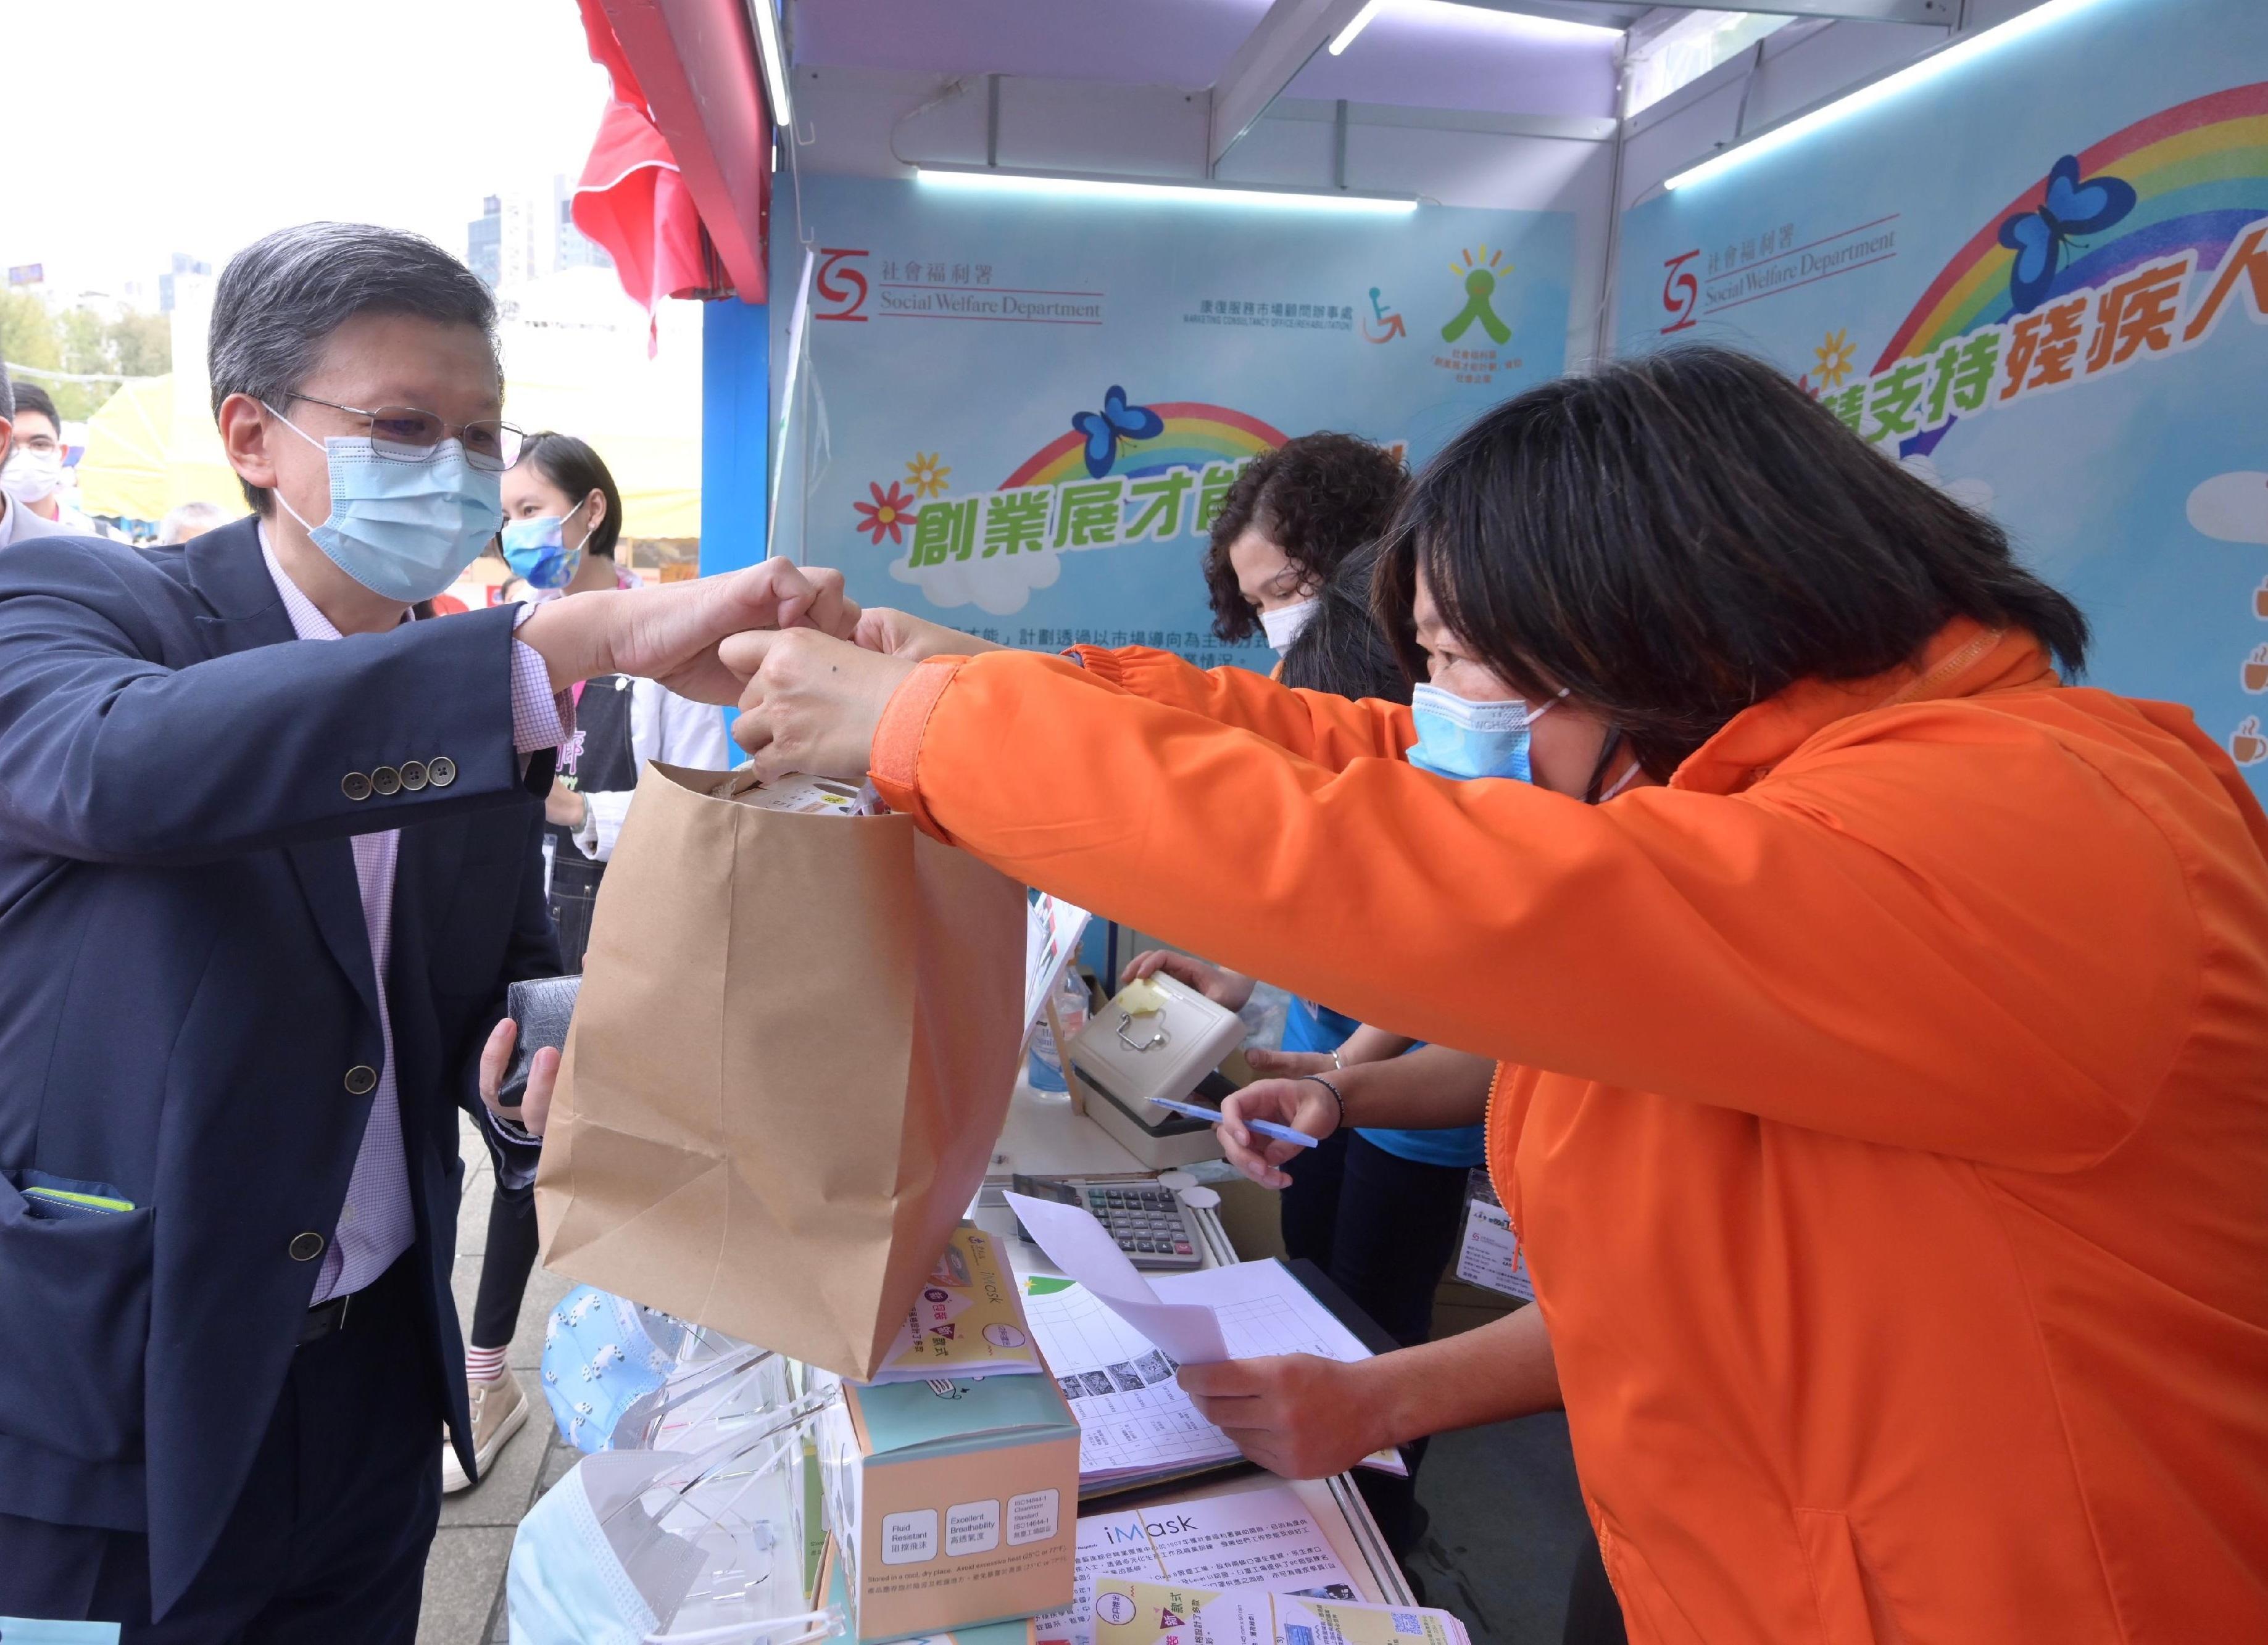 The Director of Social Welfare, Mr Gordon Leung, and the Chairperson of the Advisory Committee on Enhancing Employment of People with Disabilities, Dr Kevin Lau, visited the 55th Hong Kong Brands and Products Expo at Victoria Park today (December 22). Photo shows Mr Leung (first left) shopping at a booth set up by a rehabilitation service unit.